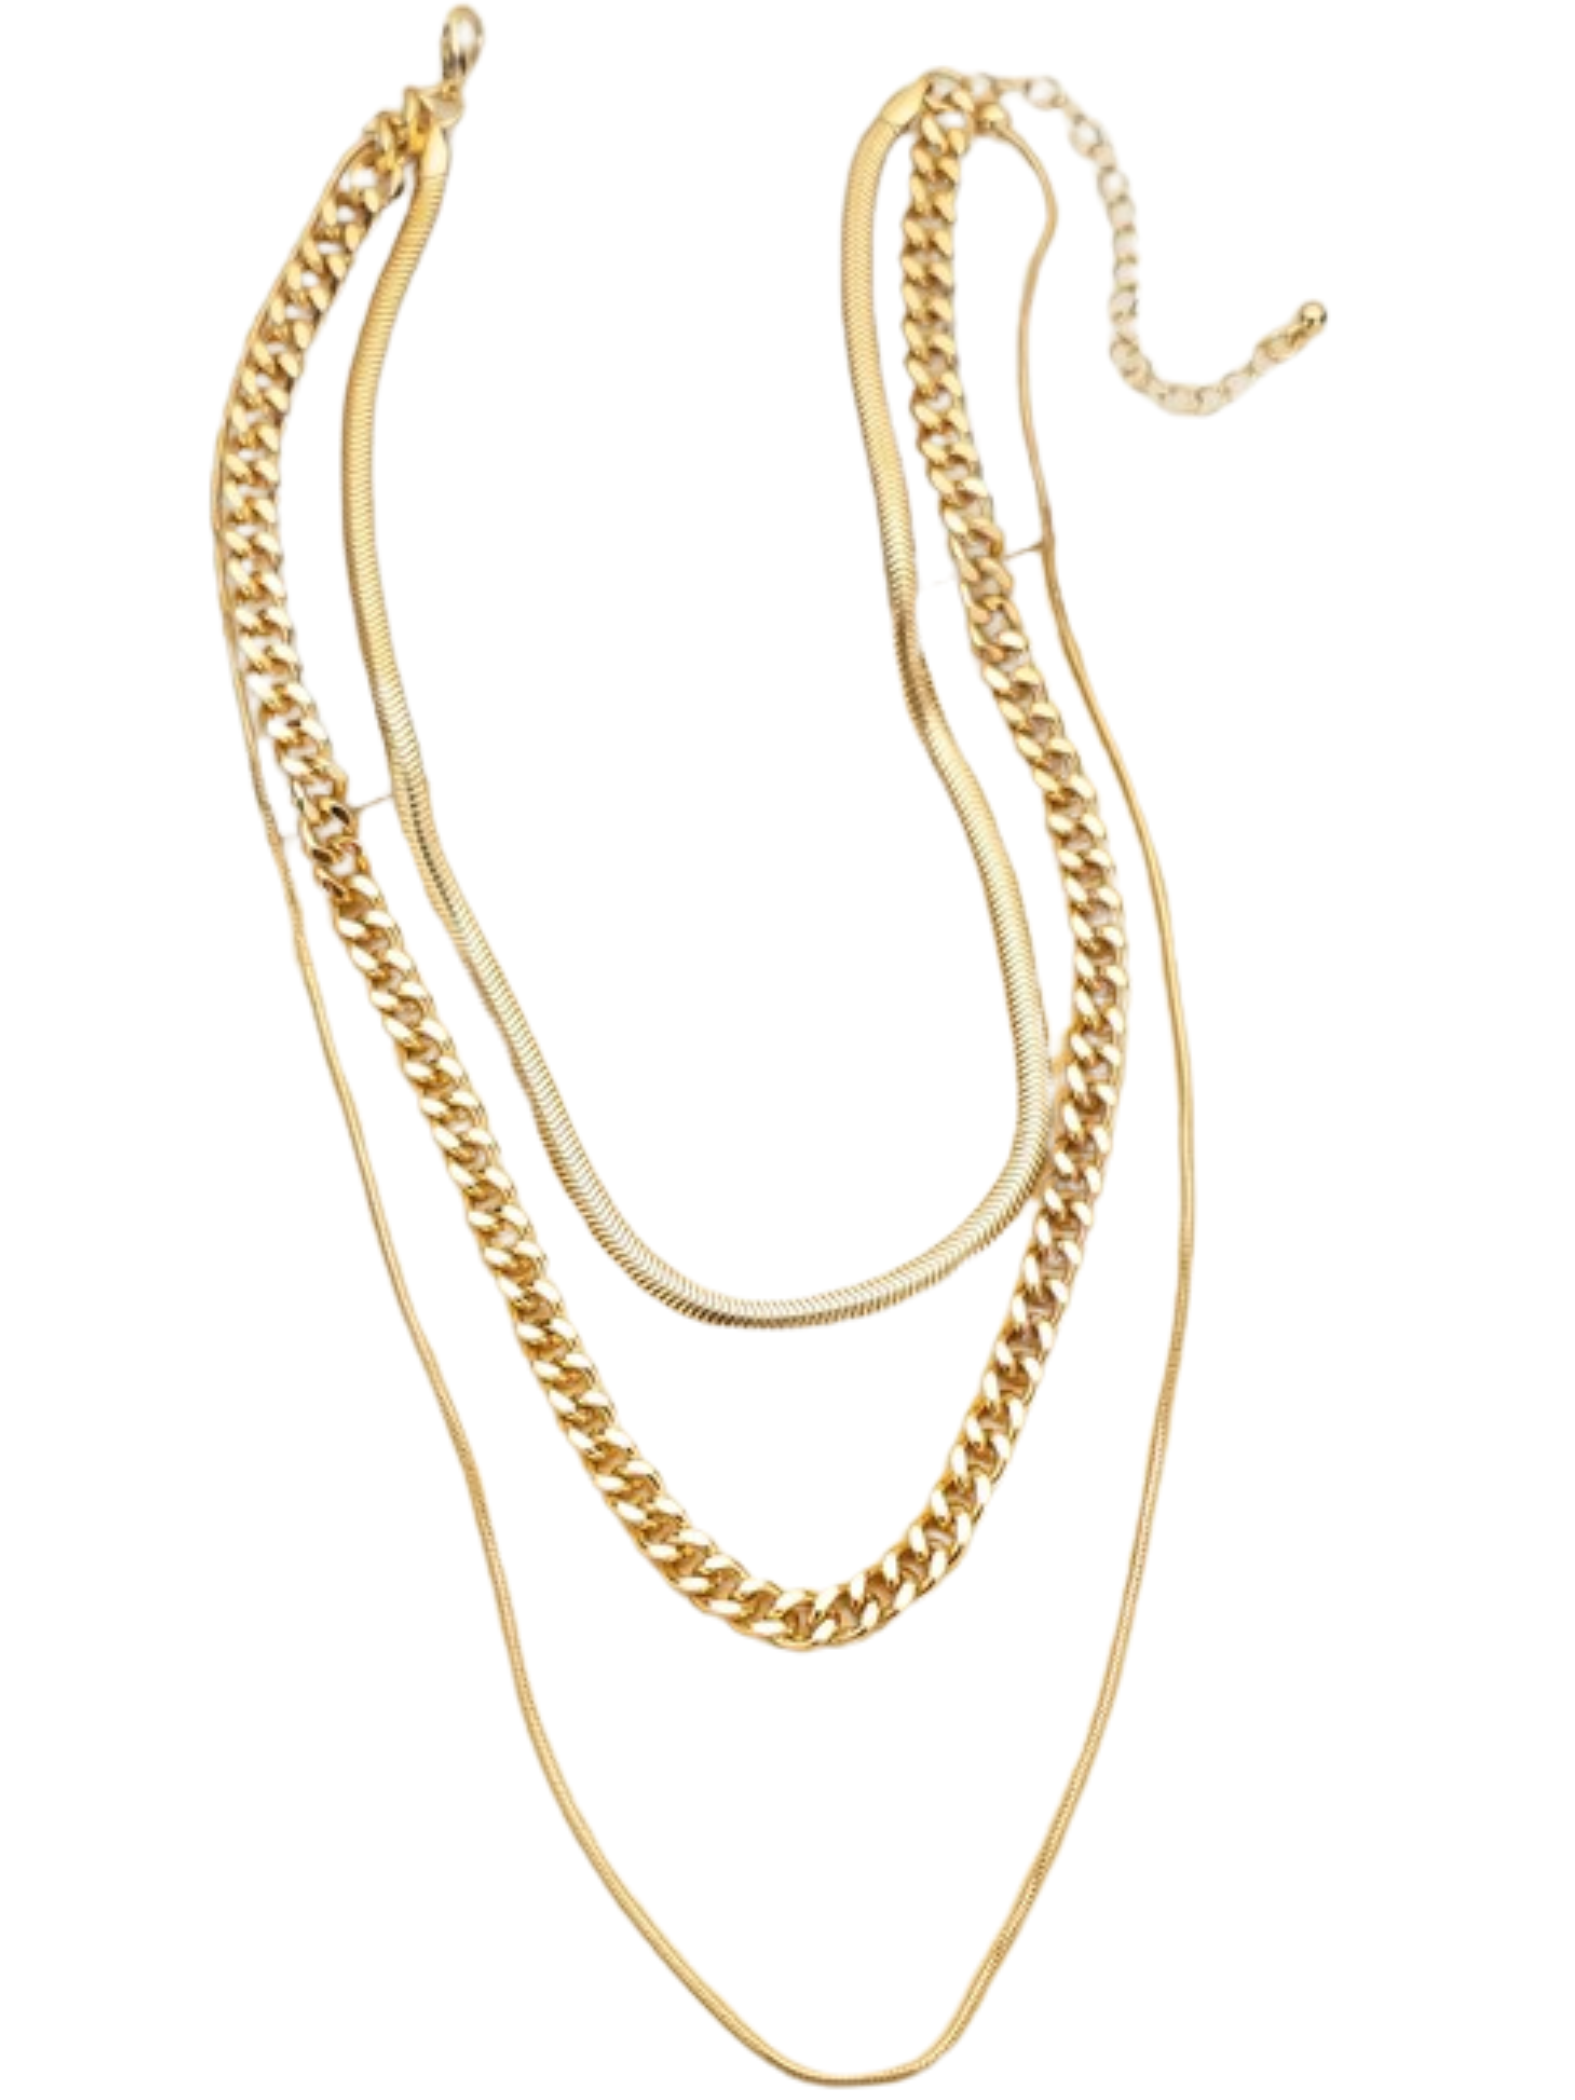 GOLD TRIPLE CHAIN NECKLACE